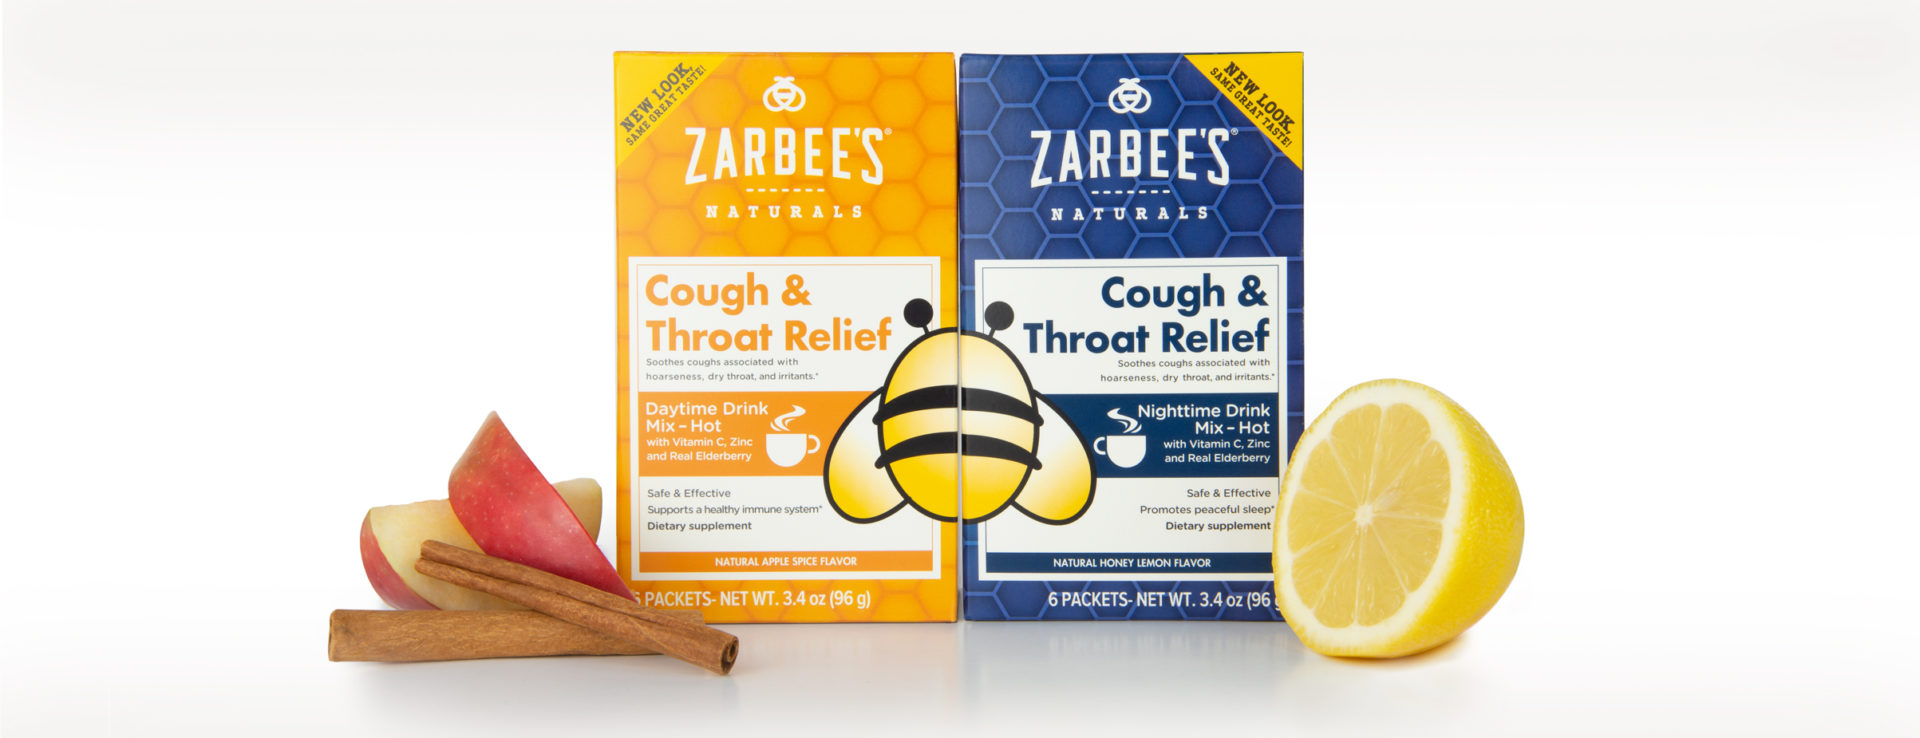 Zarbees_Cough_Throat_Relief_Slider2_2